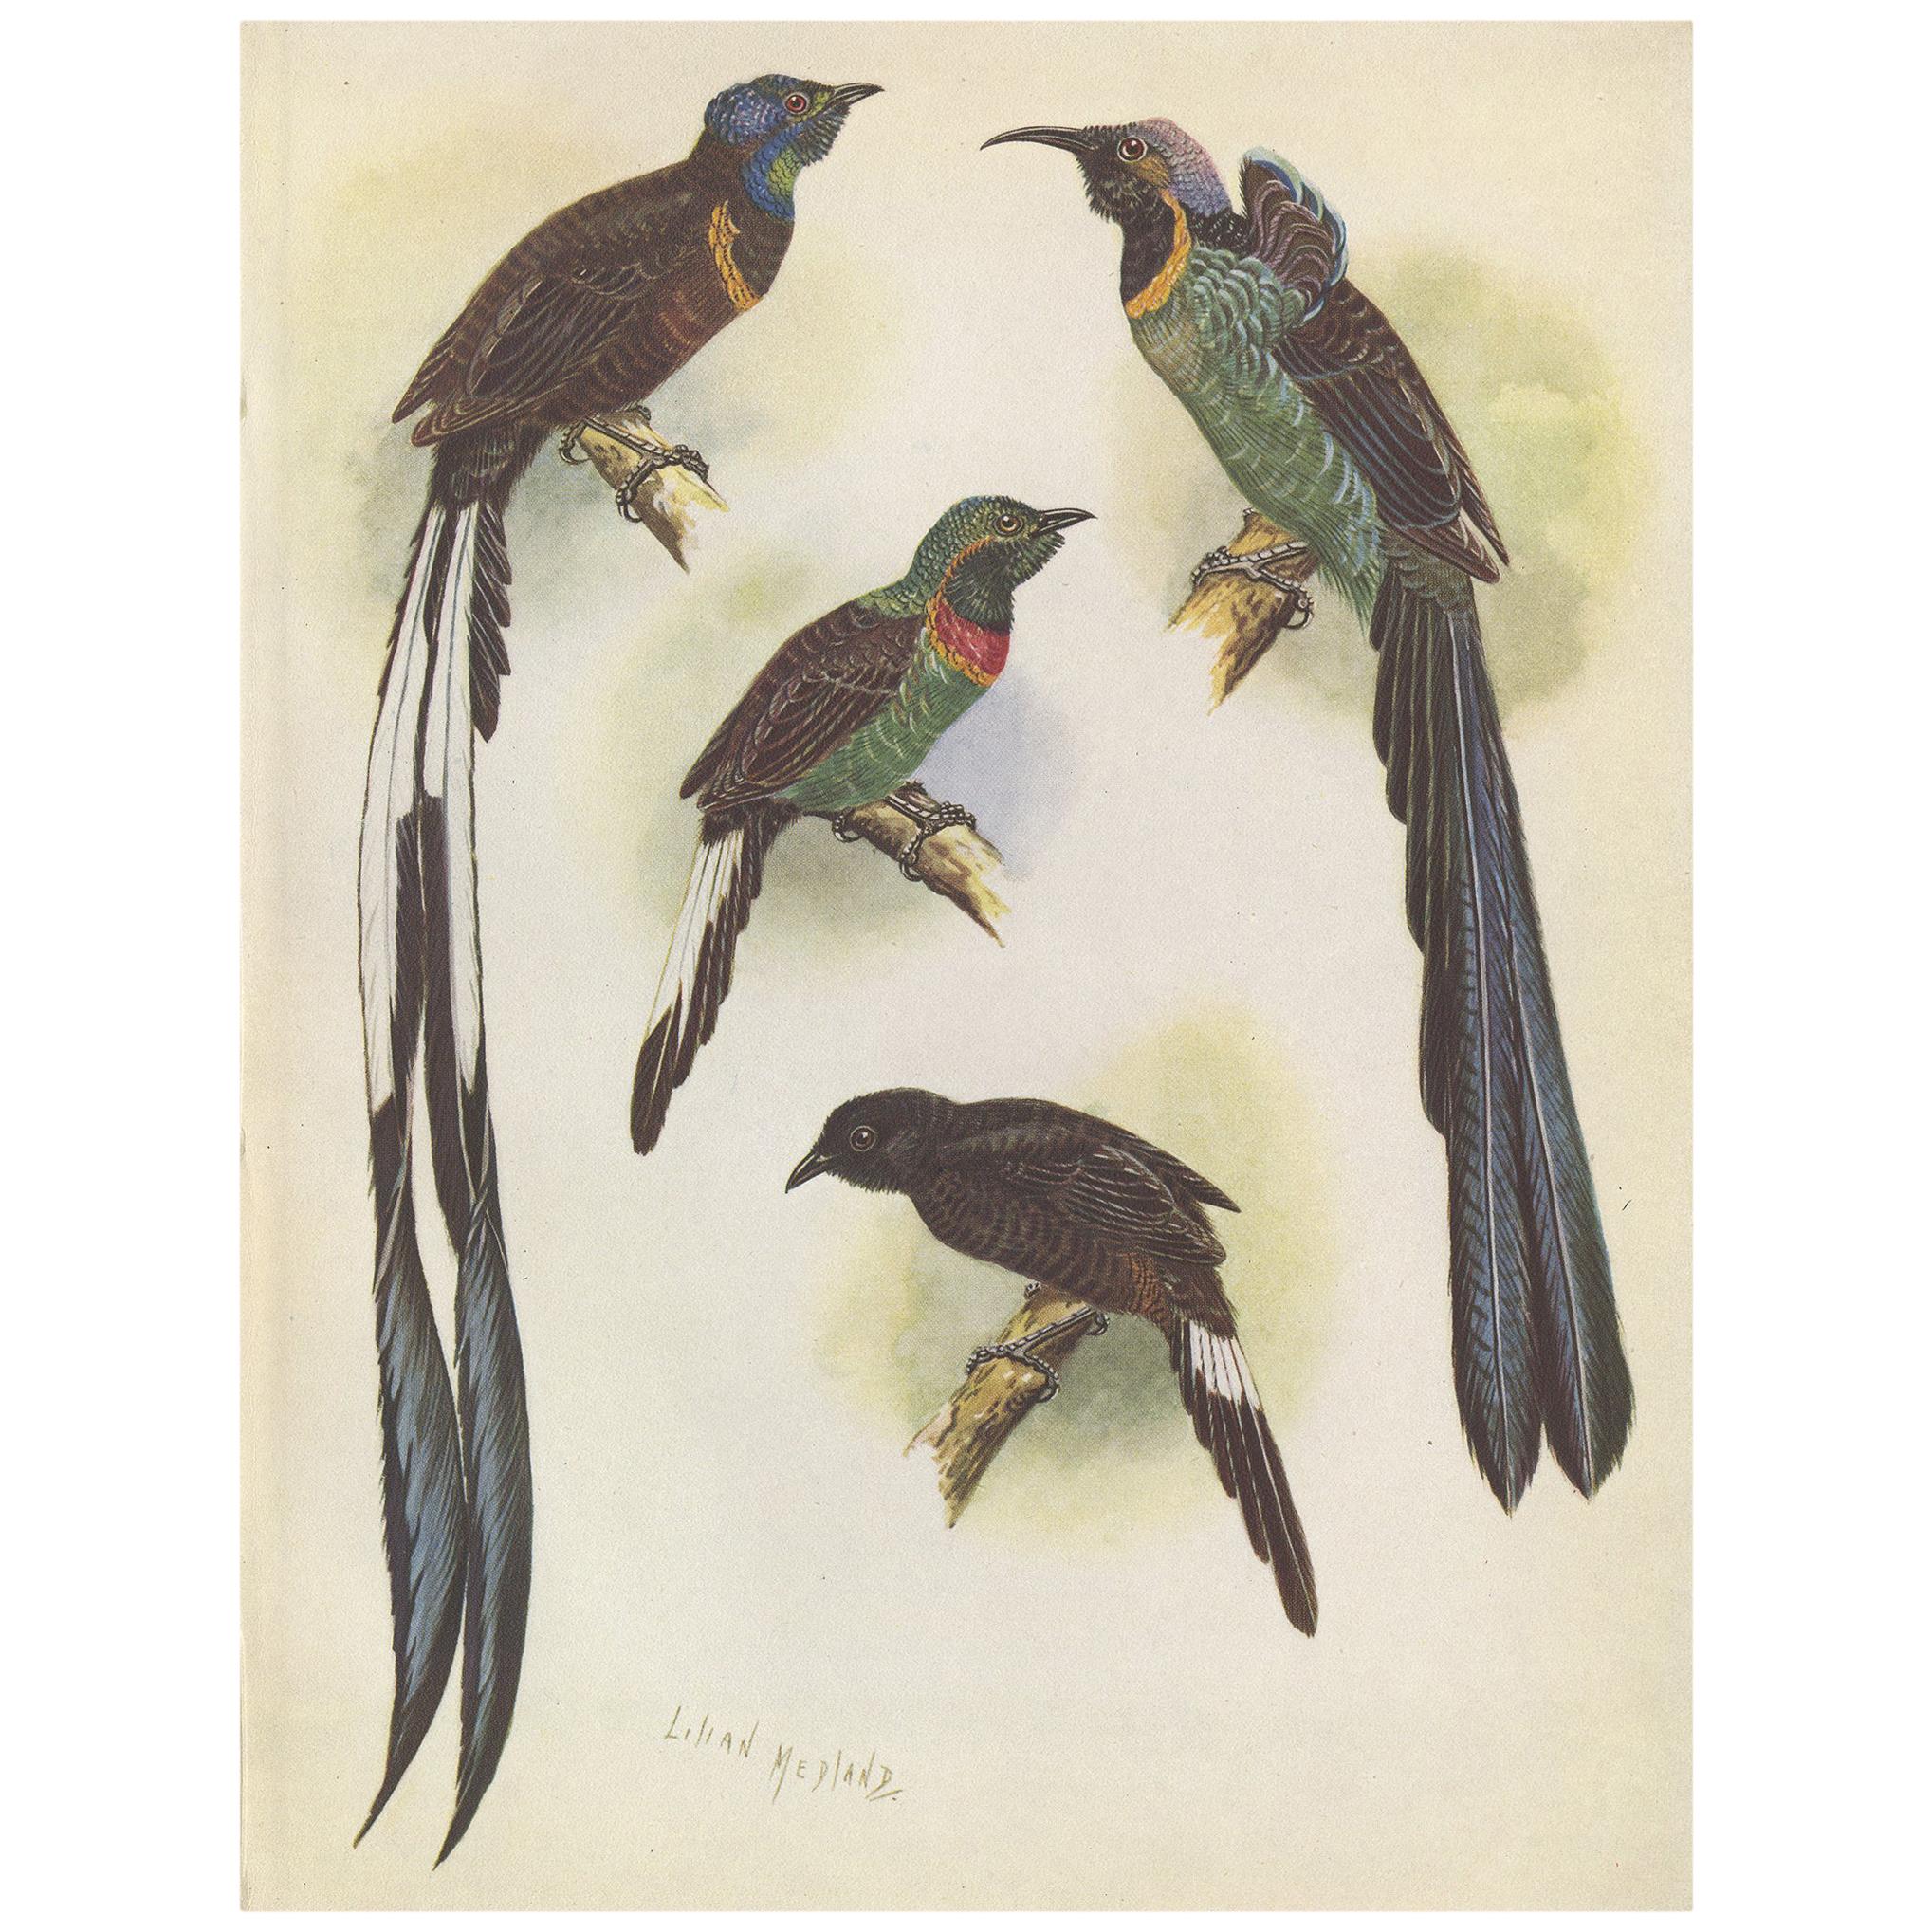 Antique Print of the Green-Breasted Sickle Bill Bird and Others '1950'